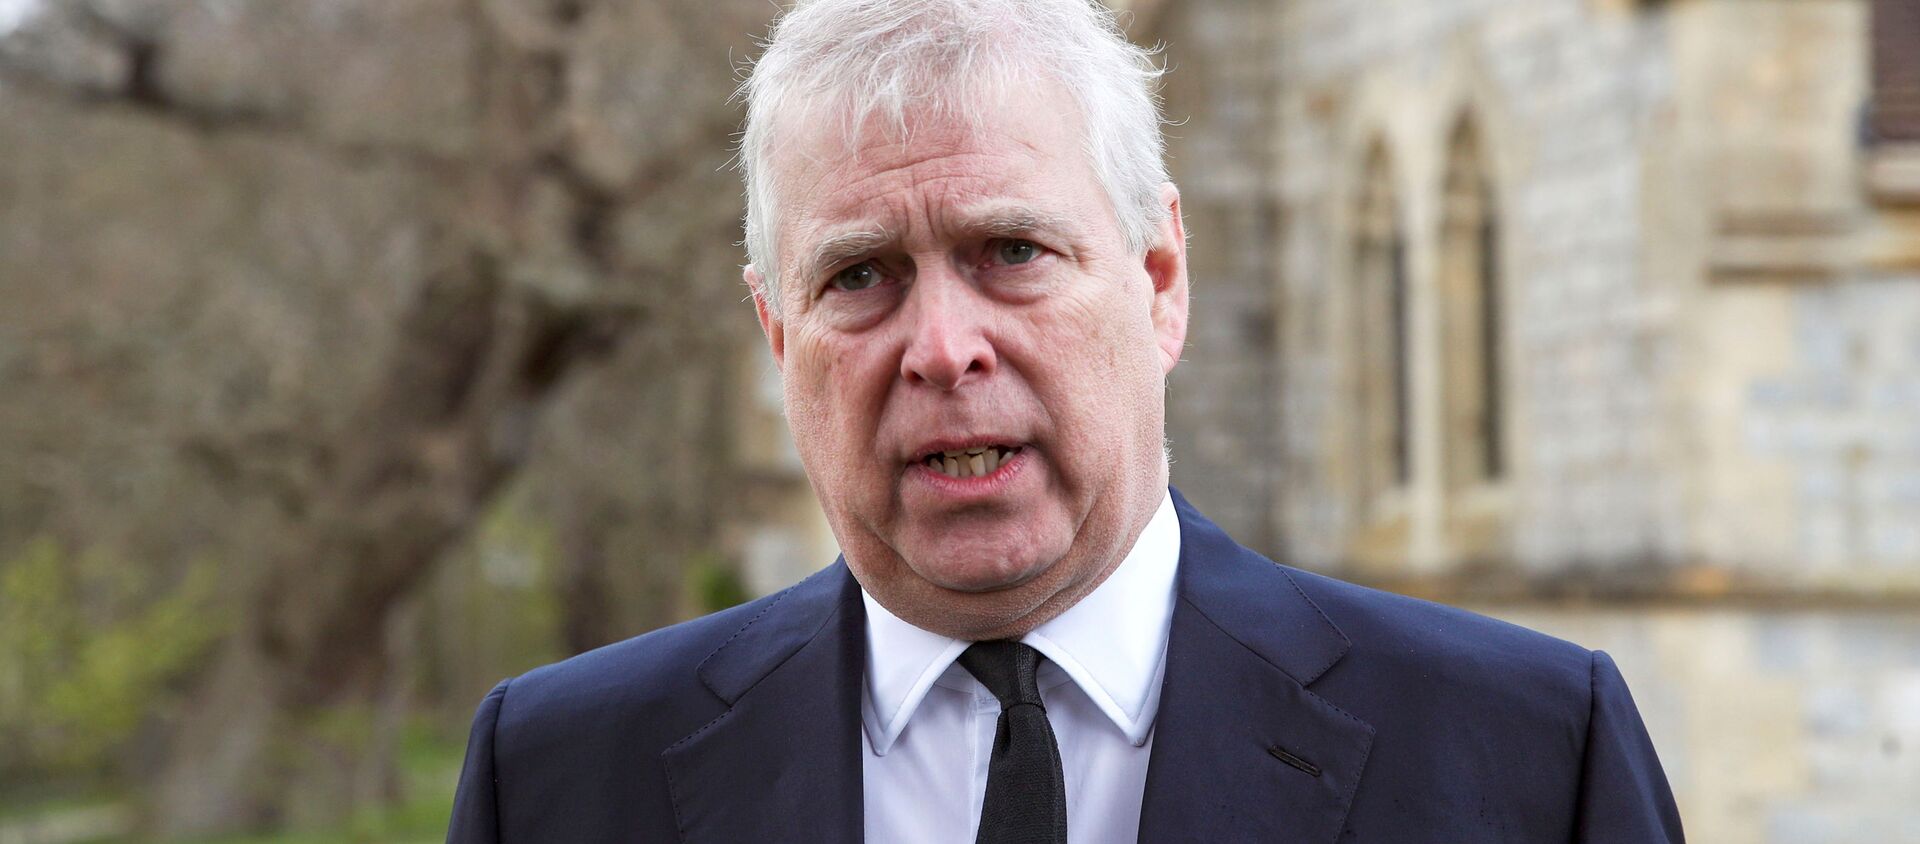 Britain's Prince Andrew speaks to the media during Sunday service at the Royal Chapel of All Saints at Windsor Great Park, Britain following Friday's death of his father Prince Philip at age 99, April 11, 2021 - Sputnik International, 1920, 16.05.2021